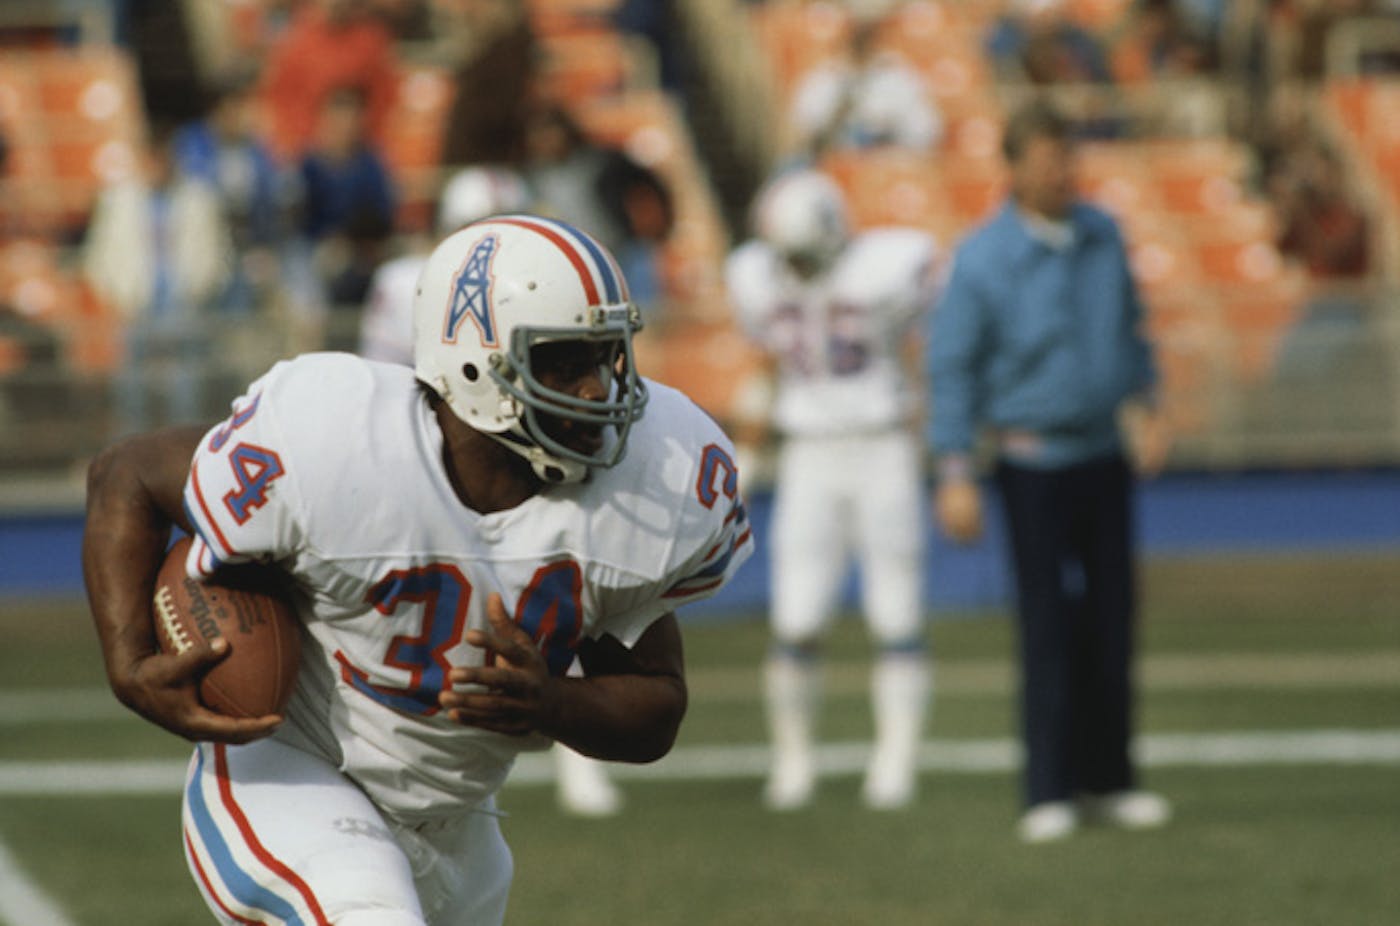 A Salute to Earl Campbell, Who Recently Celebrated 60 Years